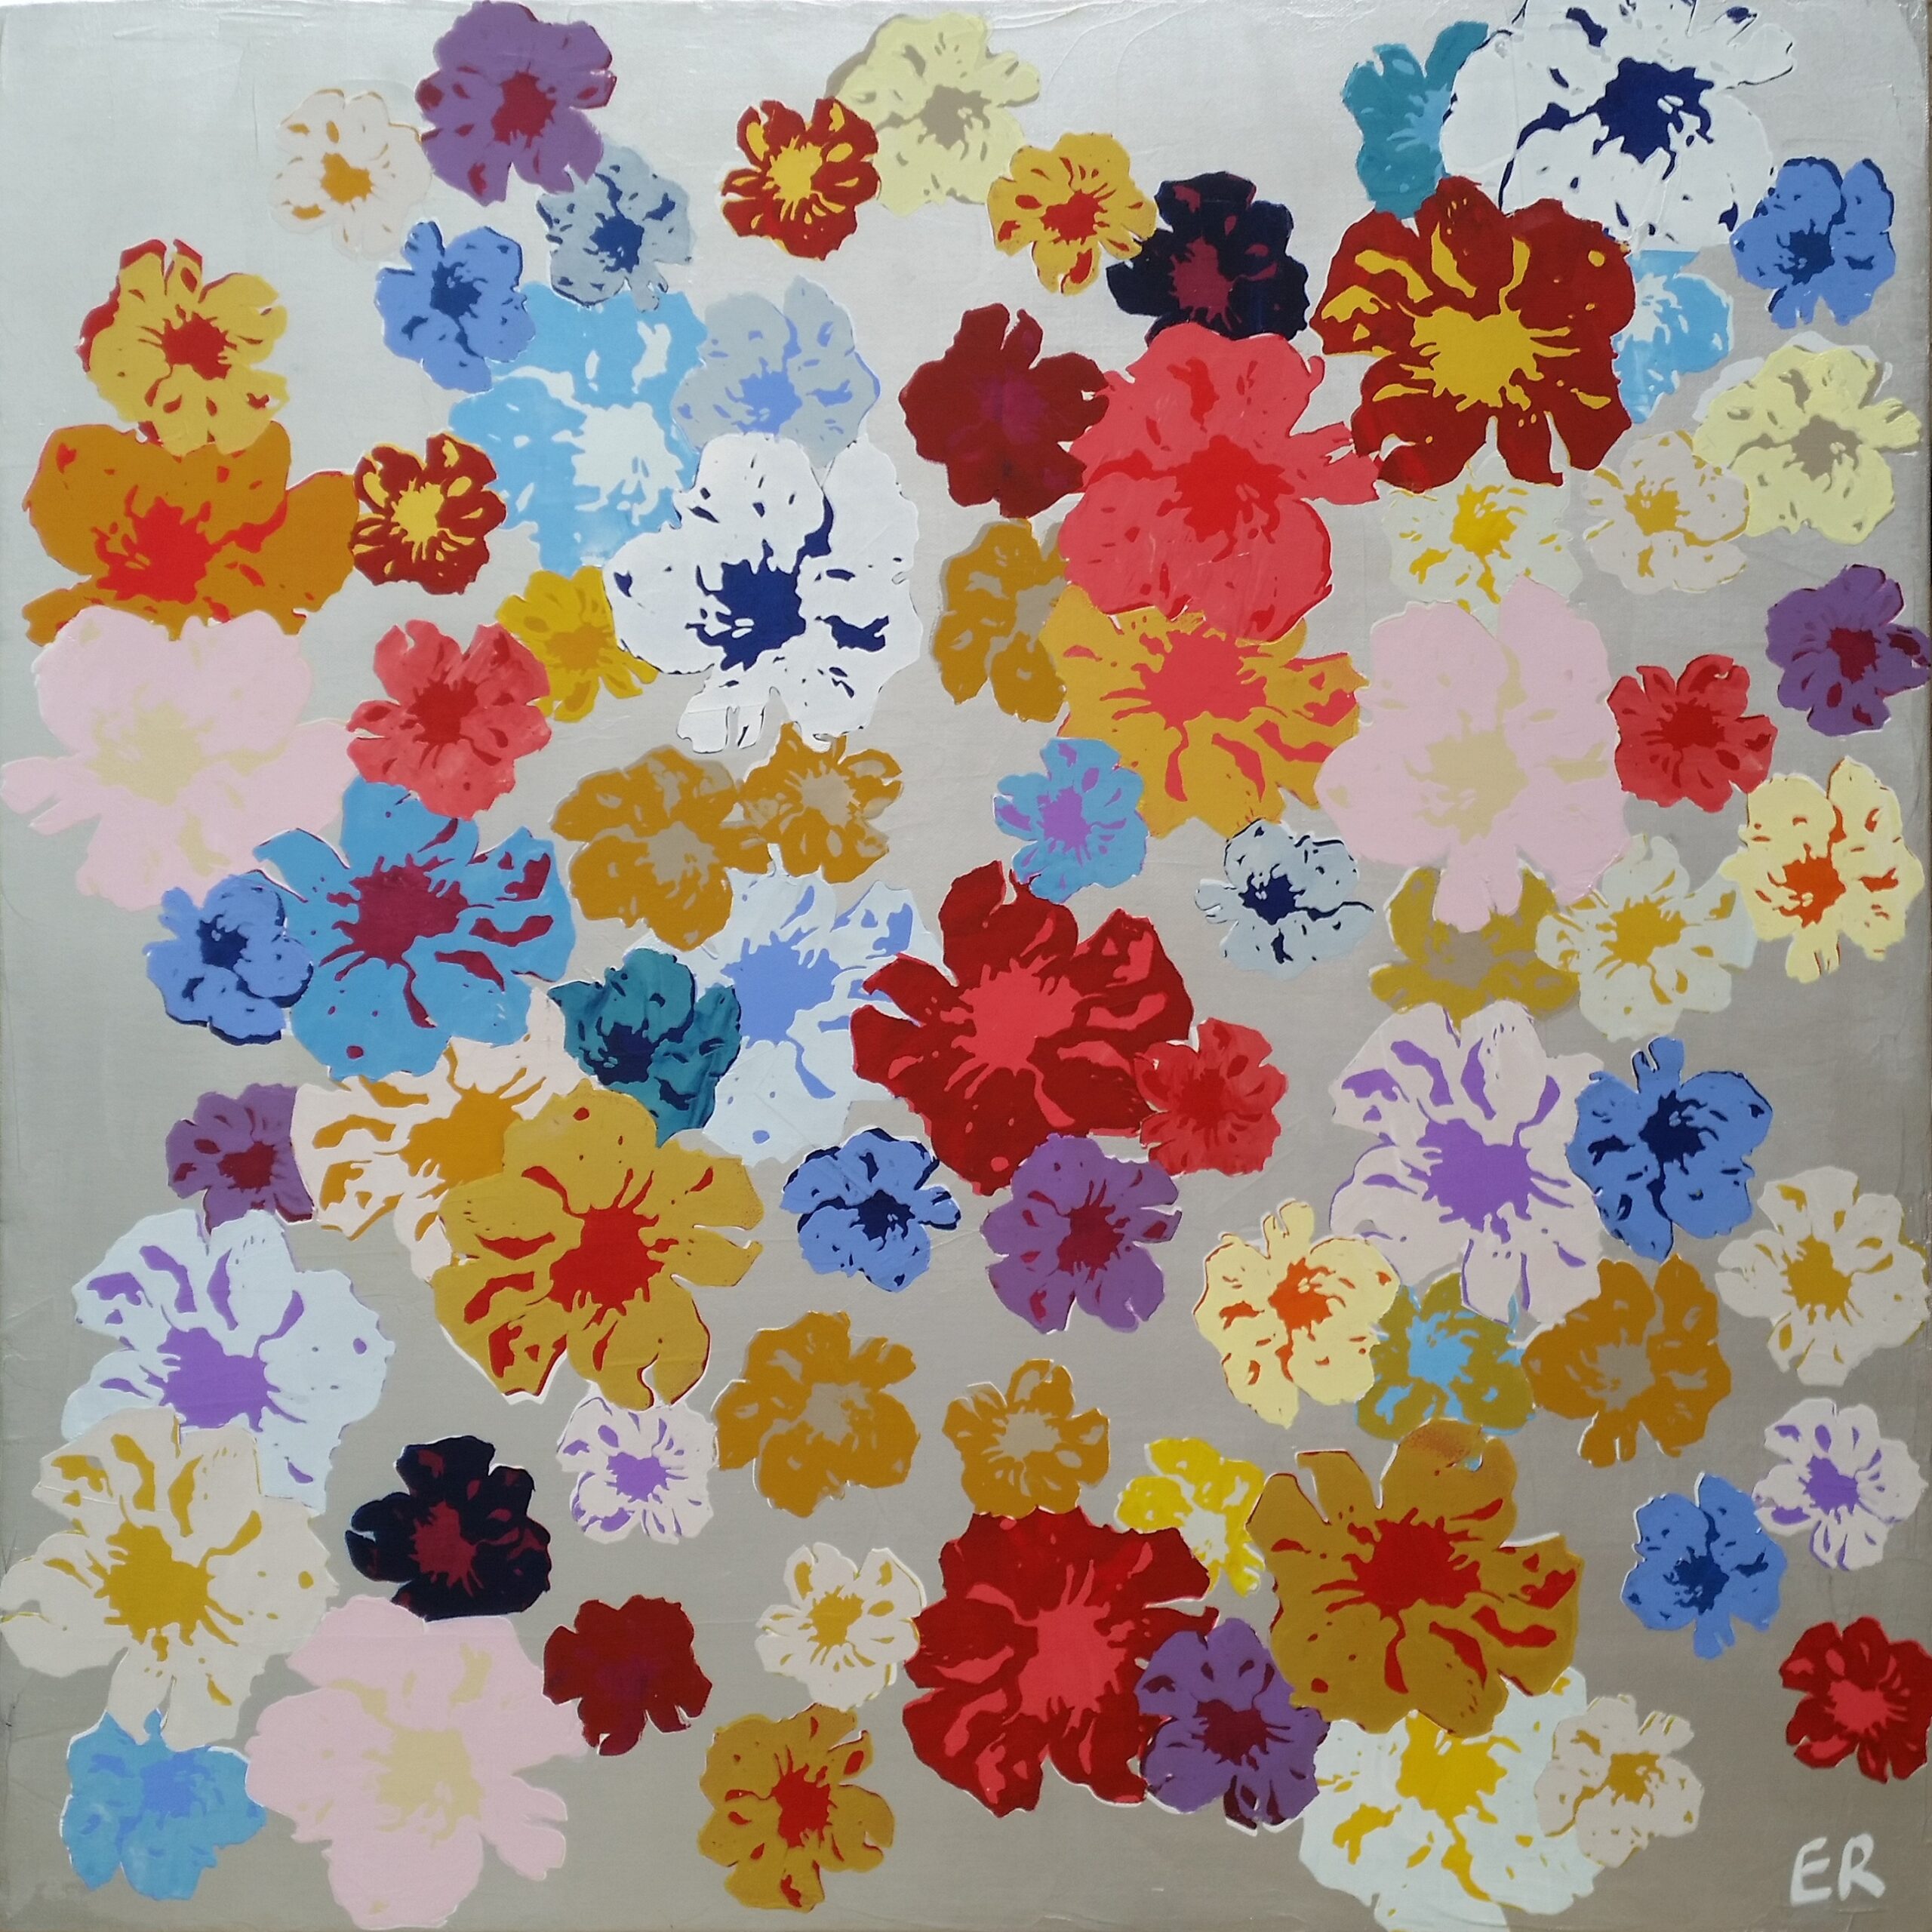 Commission – 76 Flowers, Acrylic, Aluminum Paint and Screenprinting ink on canvas, 30 x 30 inches.